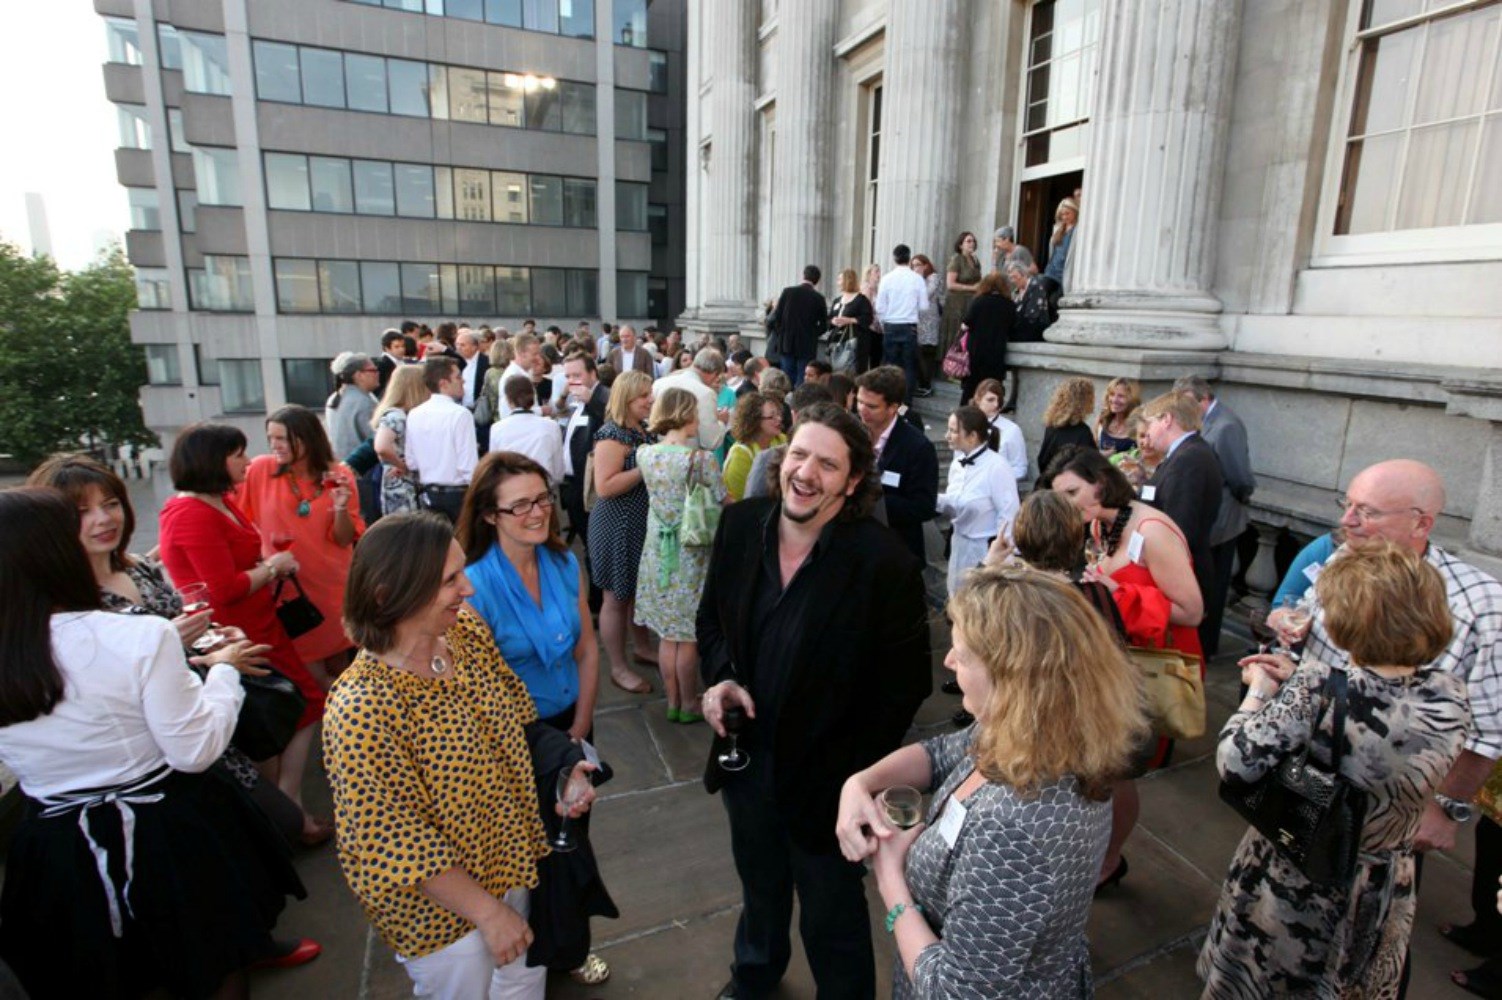 Guests on the terrace at Fishmongers' Hall before the Awards